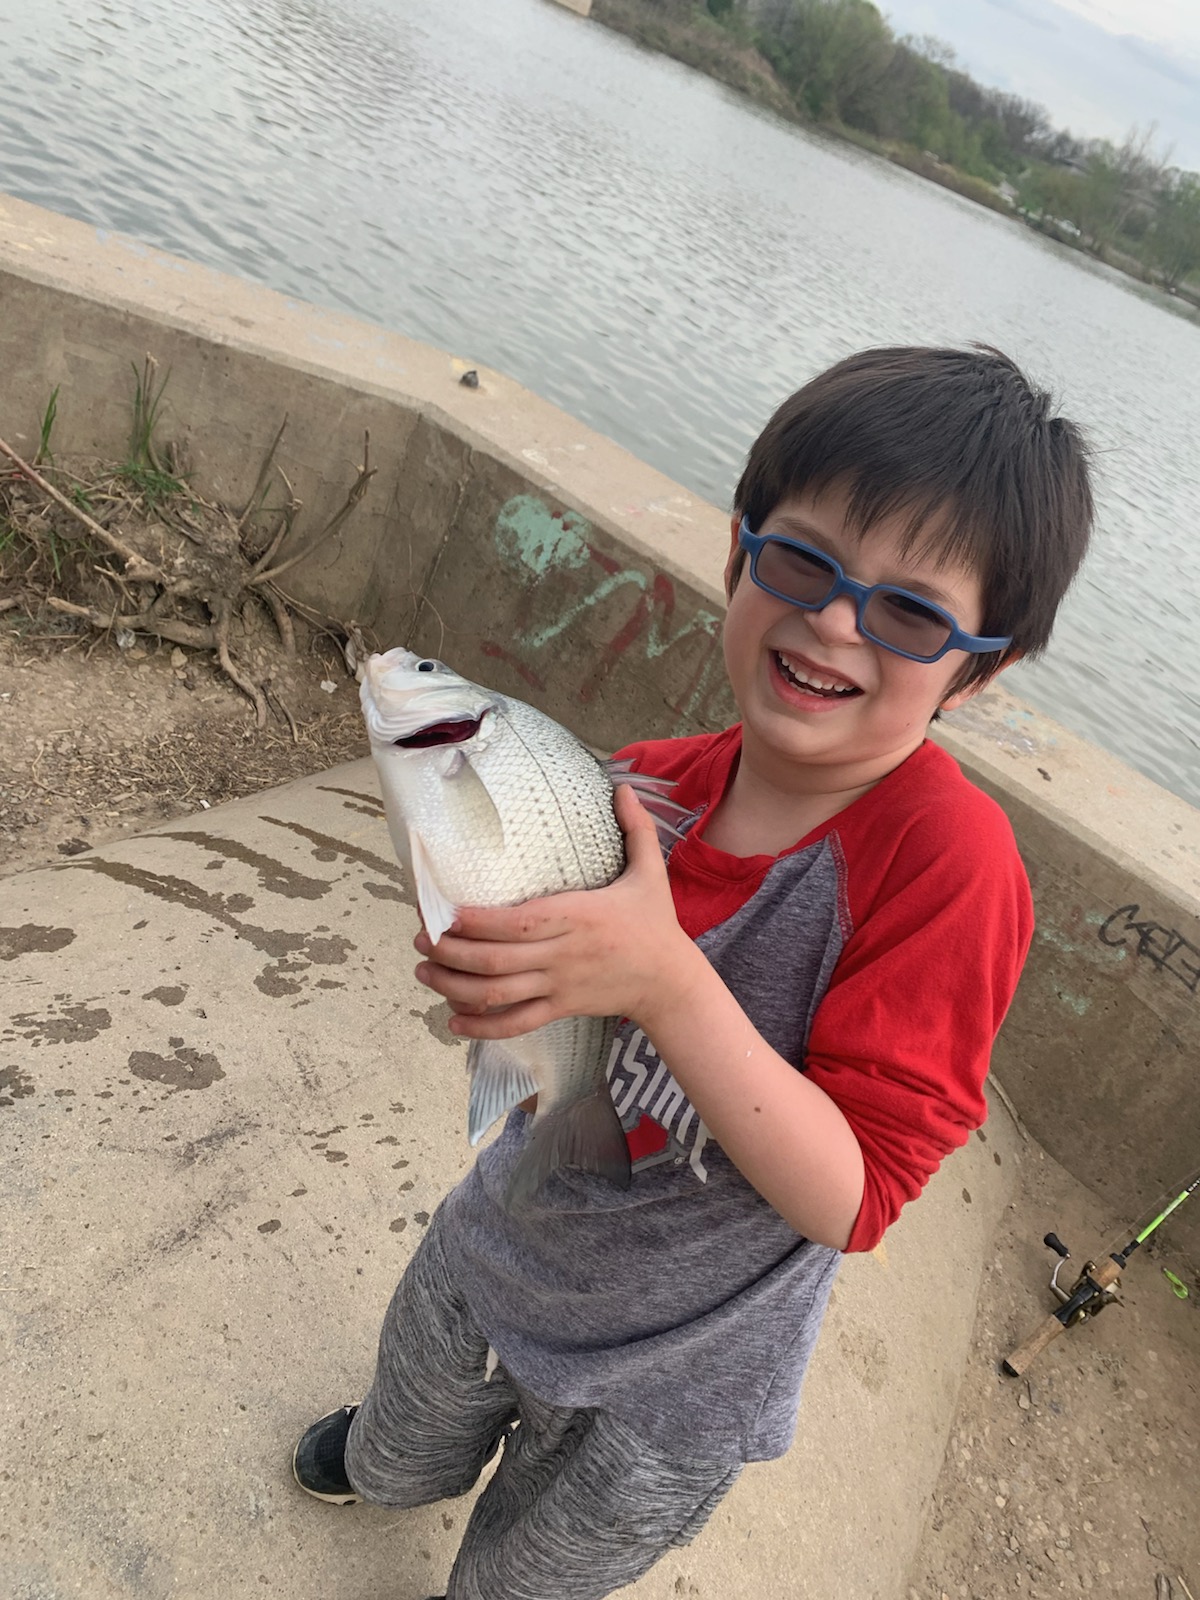 Maumee River Report 3 may 2020- Open every day